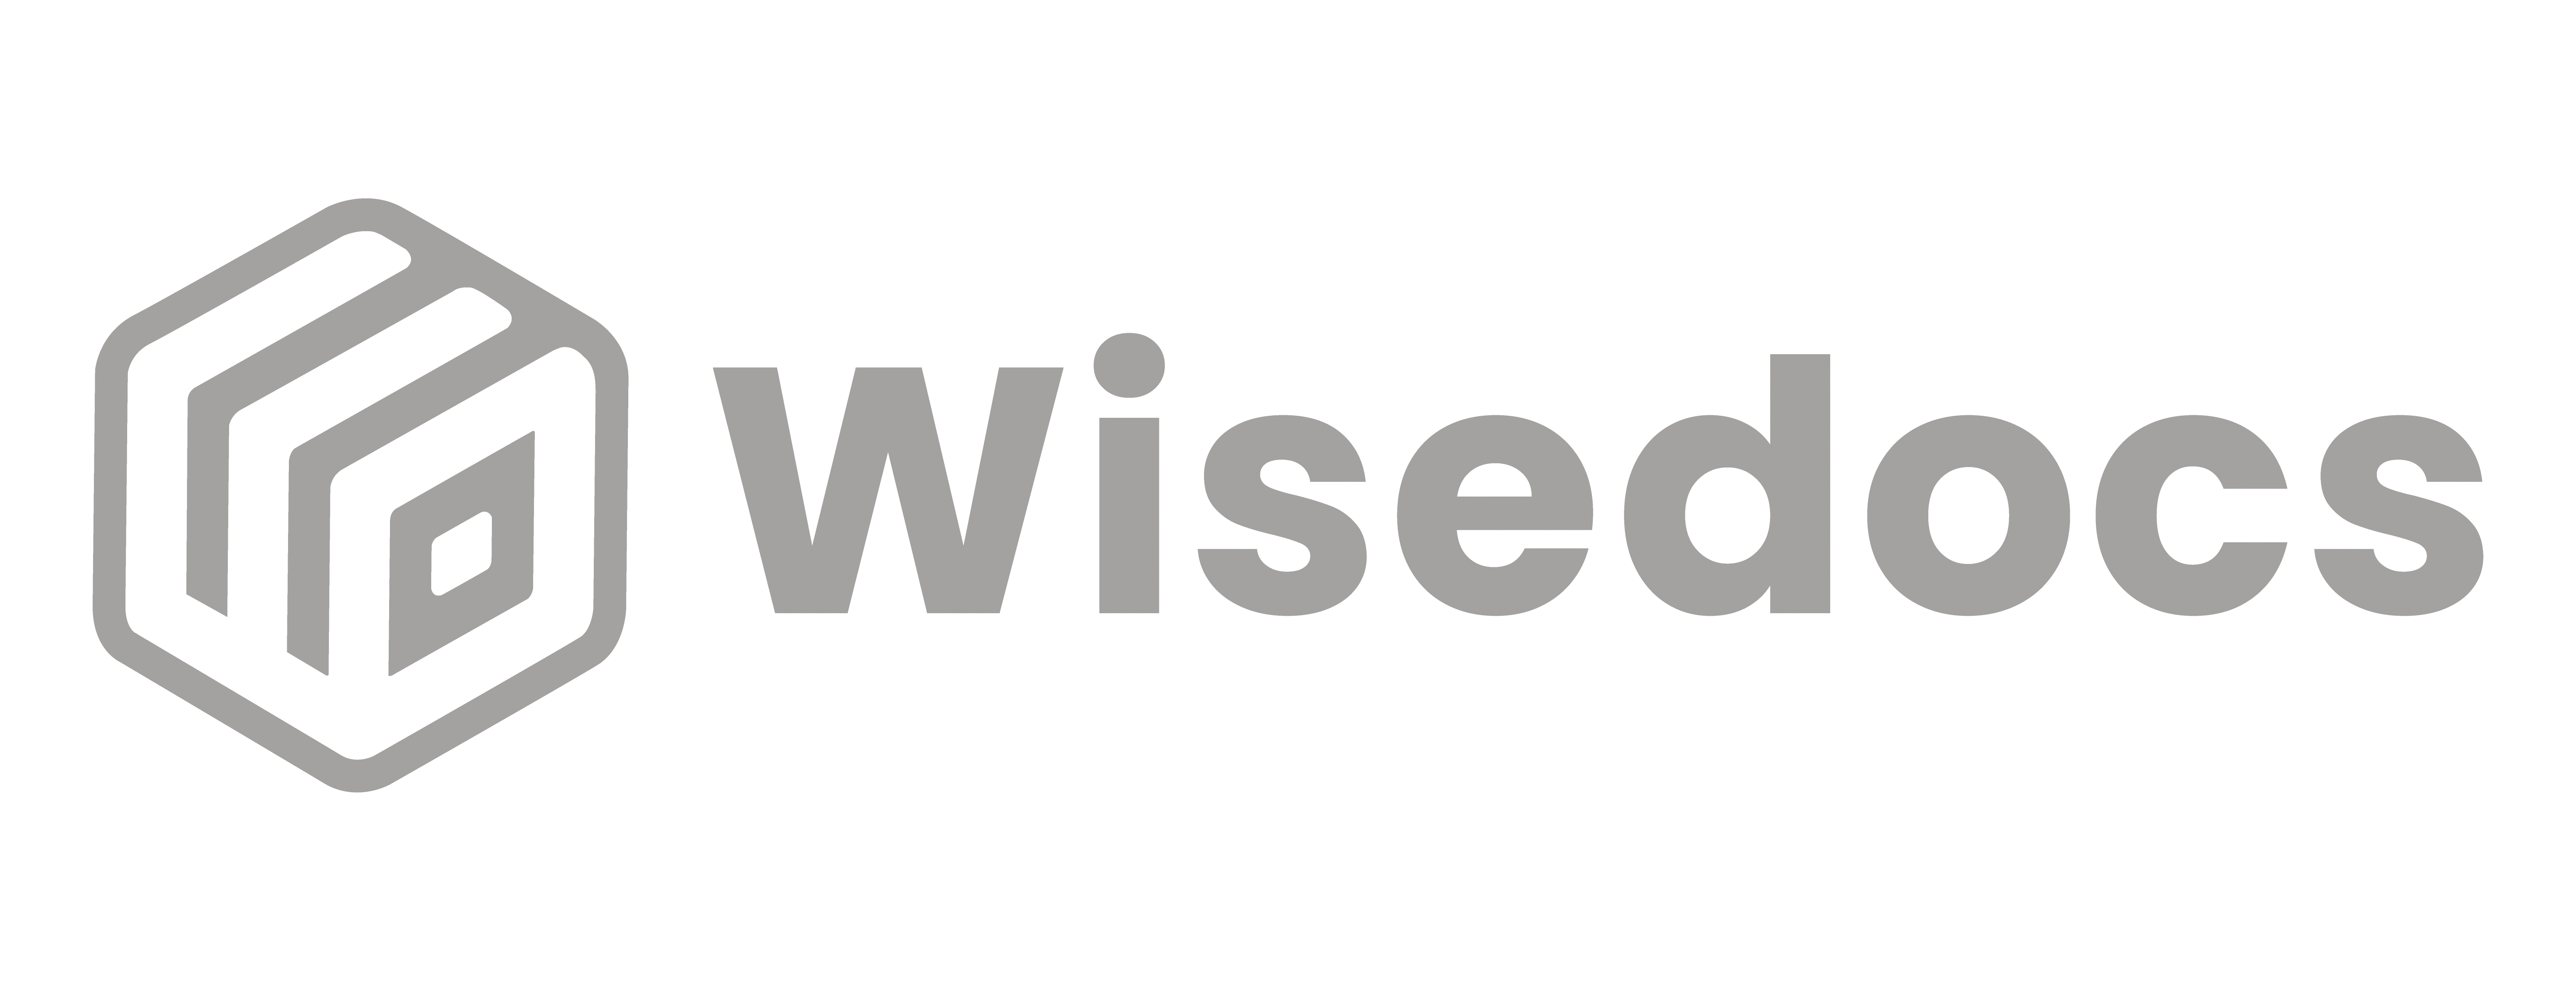 Wisedocs logo on a white background for corporate photography.